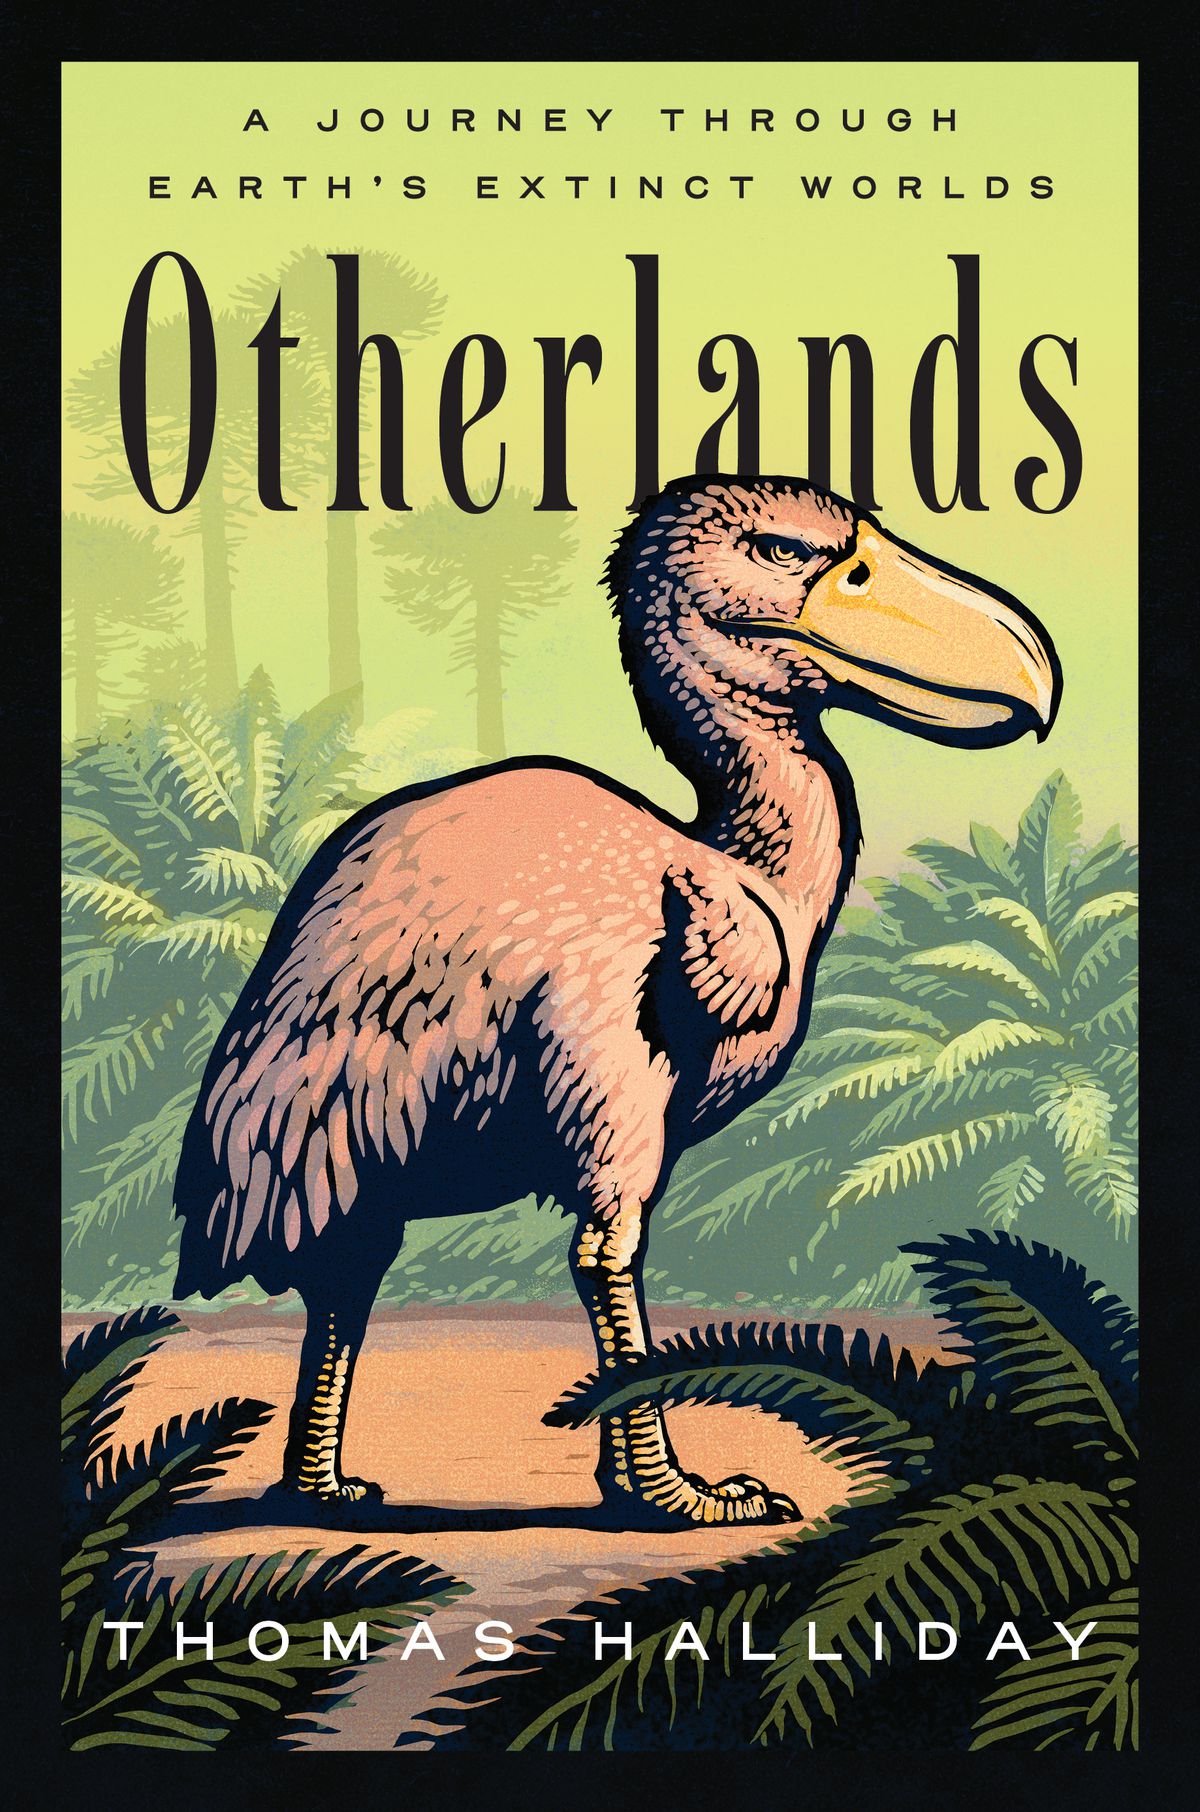 The cover of “Otherlands: A Journey Through Earth’s Extinct Worlds,” which depicts an odd, nub-winged brown bird with a large, curved yellow beak standing on the ground, looking off to the right.